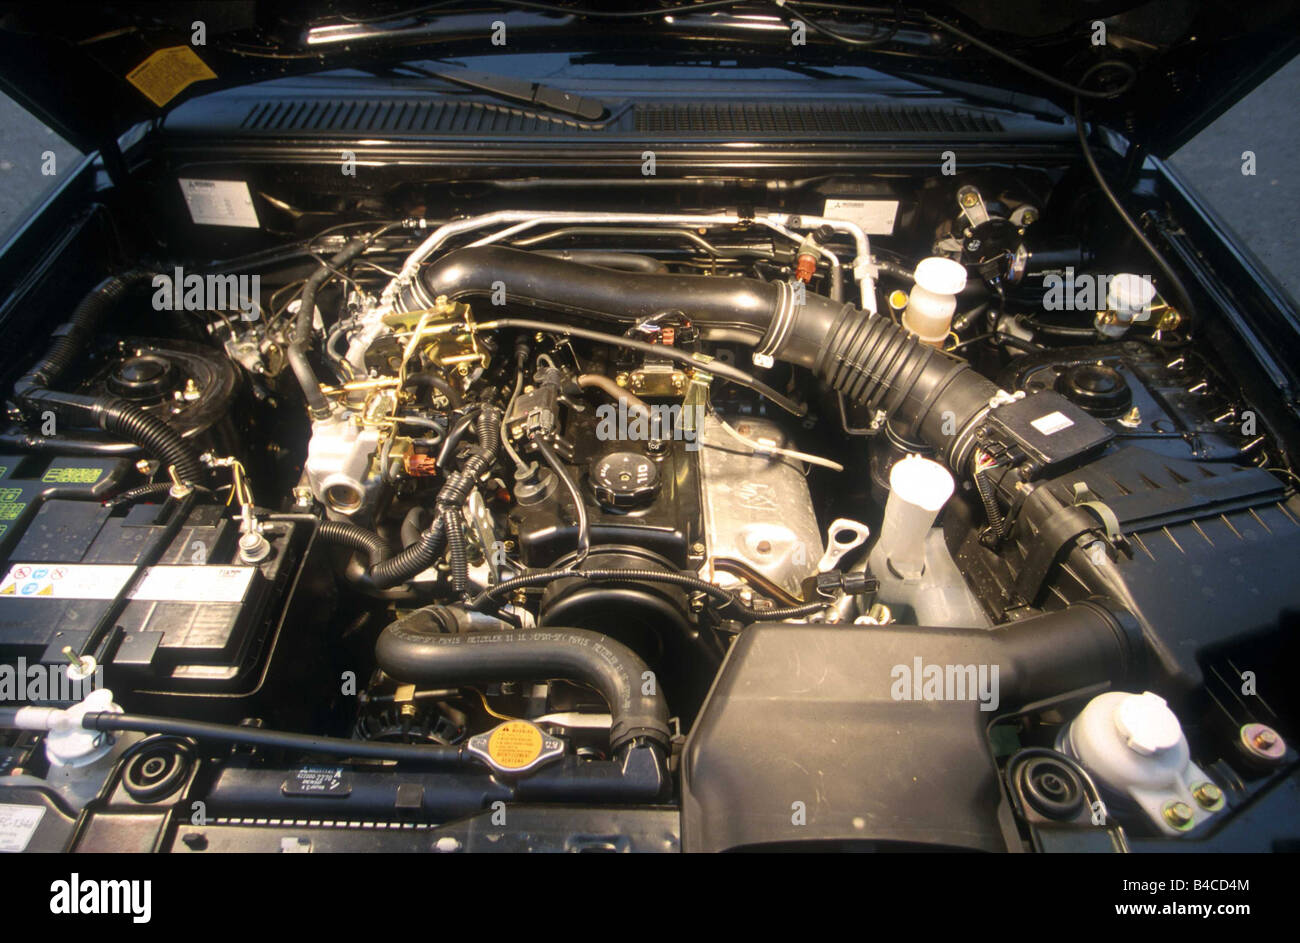 Car, Mitsubishi Pajero Pinin, cross country vehicle, model year 2002-, black, view in engine compartment, engine, technique/acce Stock Photo